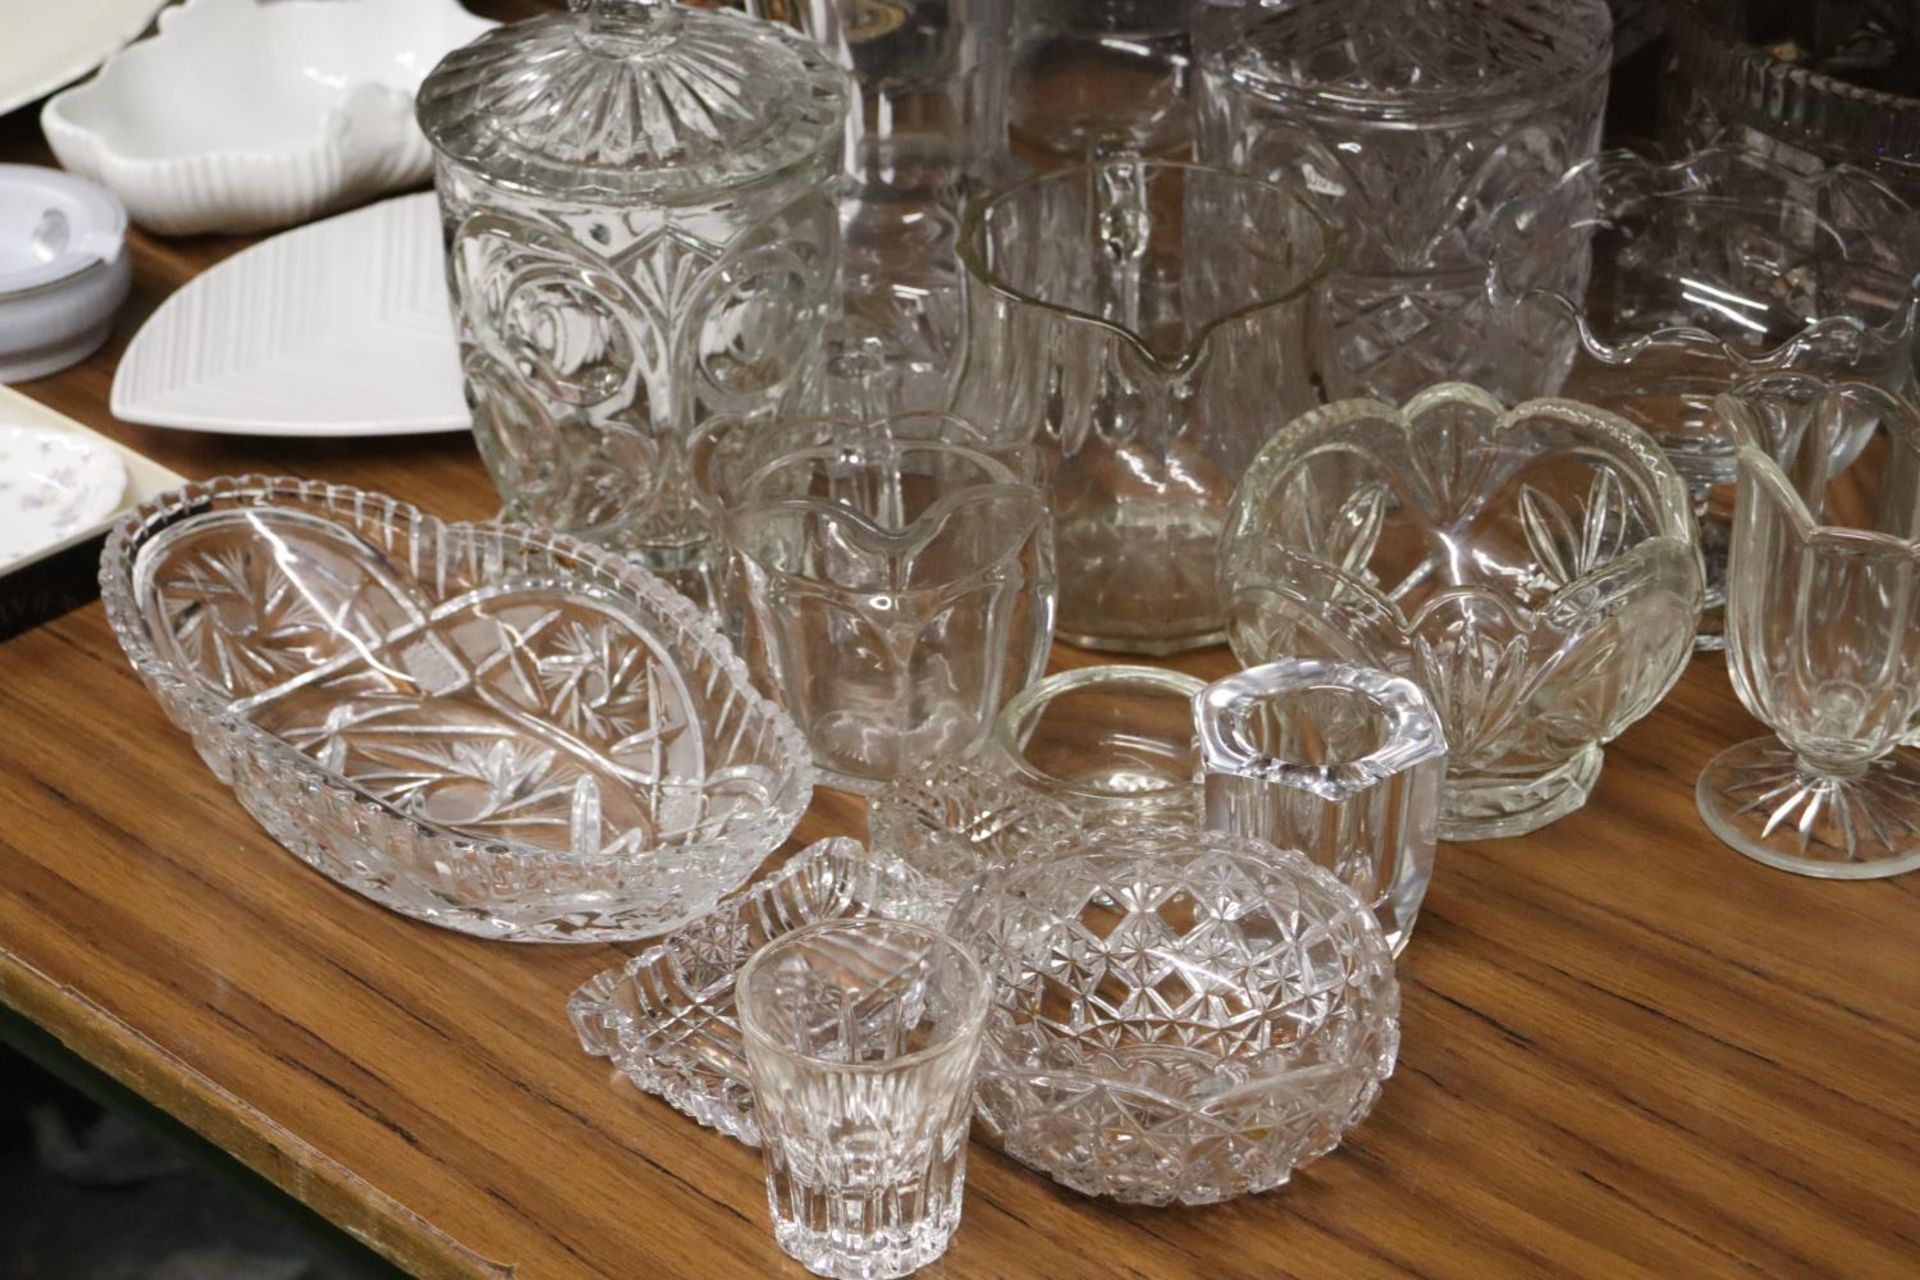 A LARGE QUANTITY OF GLASSWARE TO INCLUDE BOWLS, JUGS, LIDDED CONTAINERS, ETC - Image 5 of 5